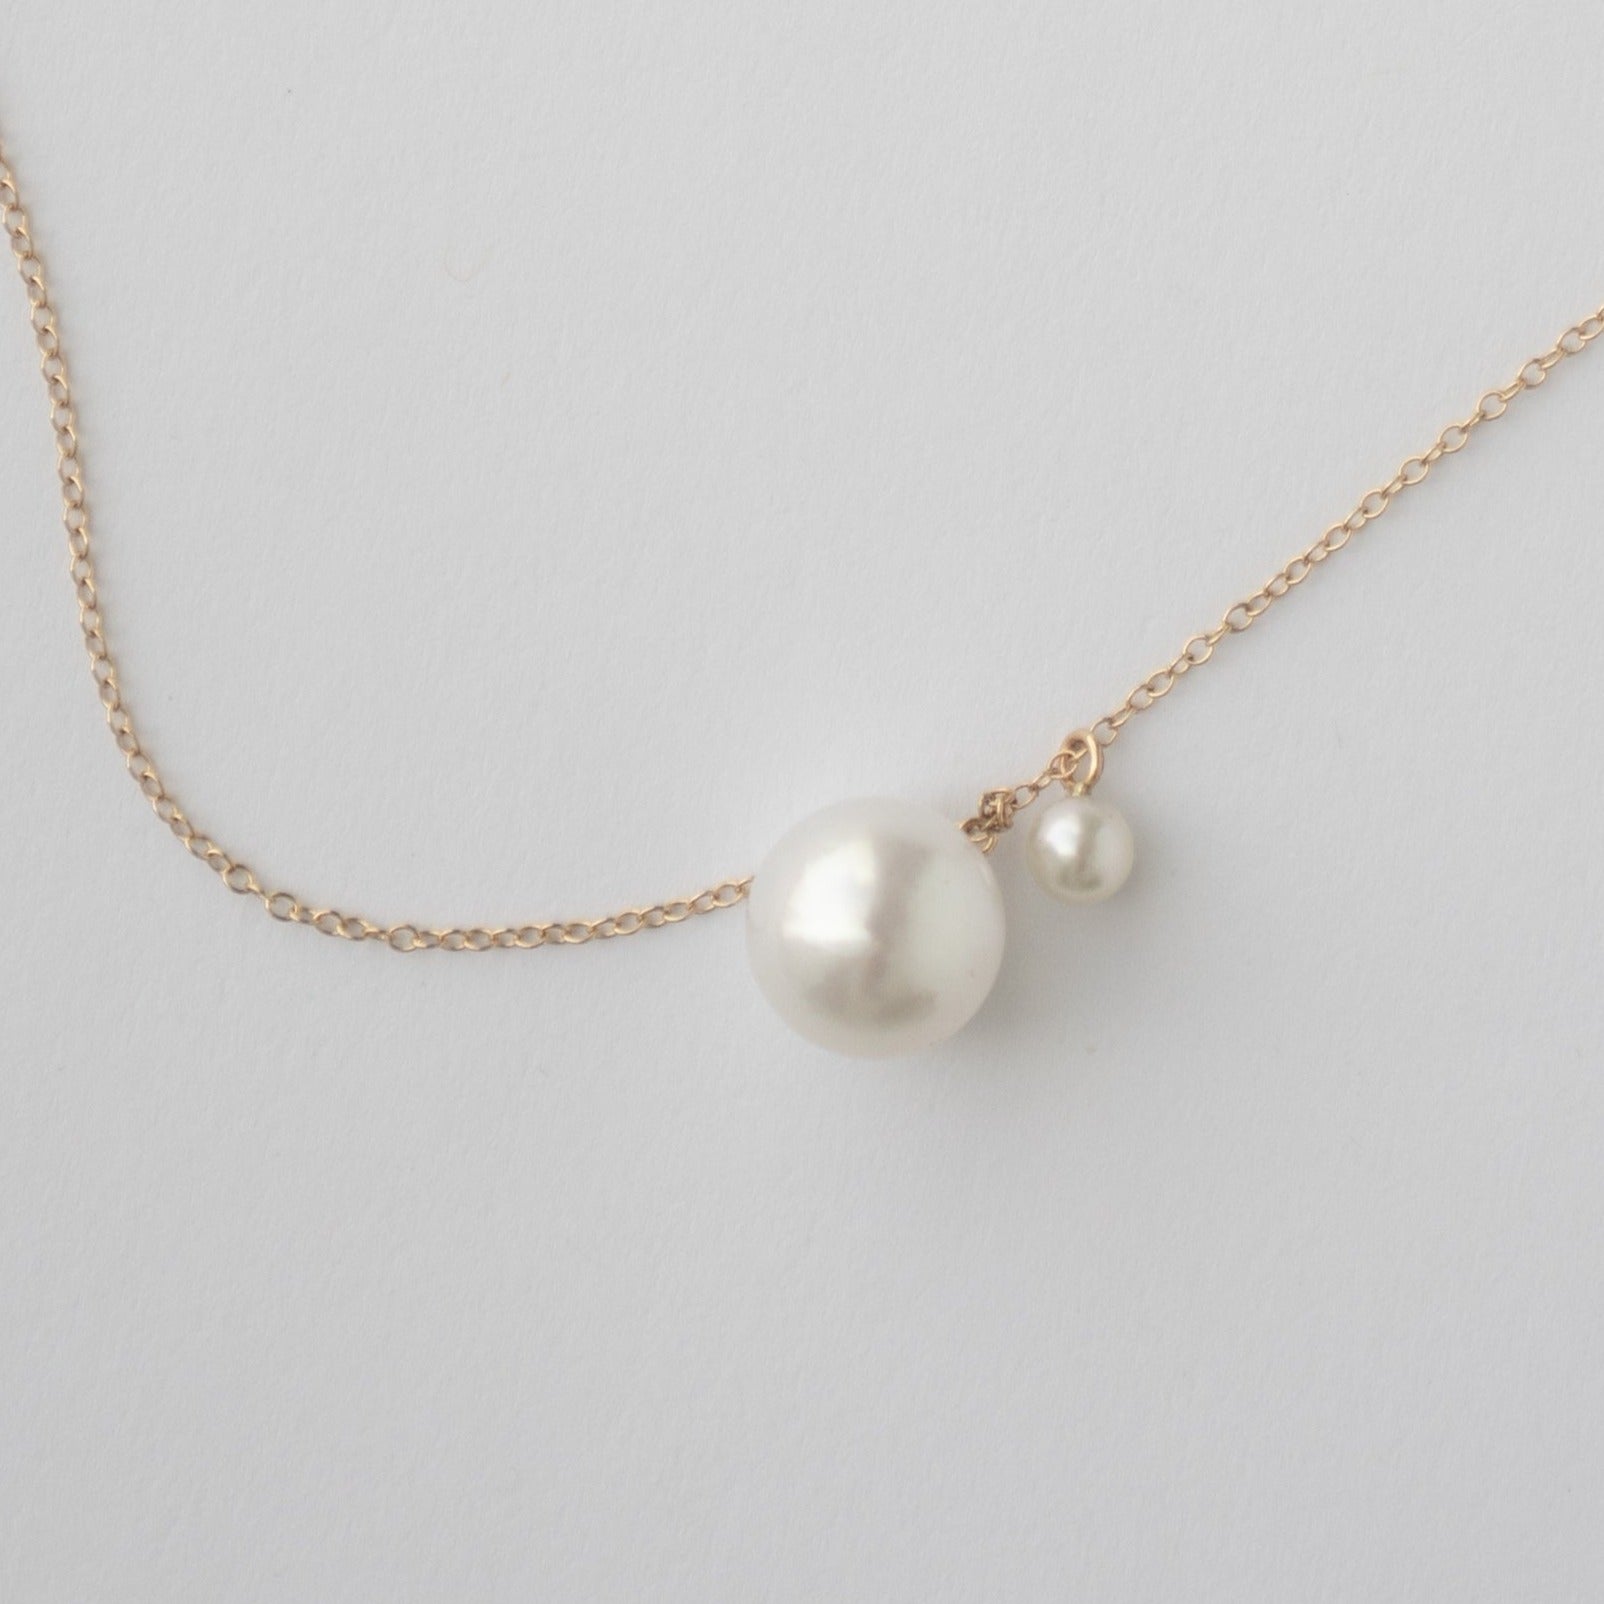 Unique RIti necklace in 14k yellow gold with pearls made in NYC by SHW fine Jewelry